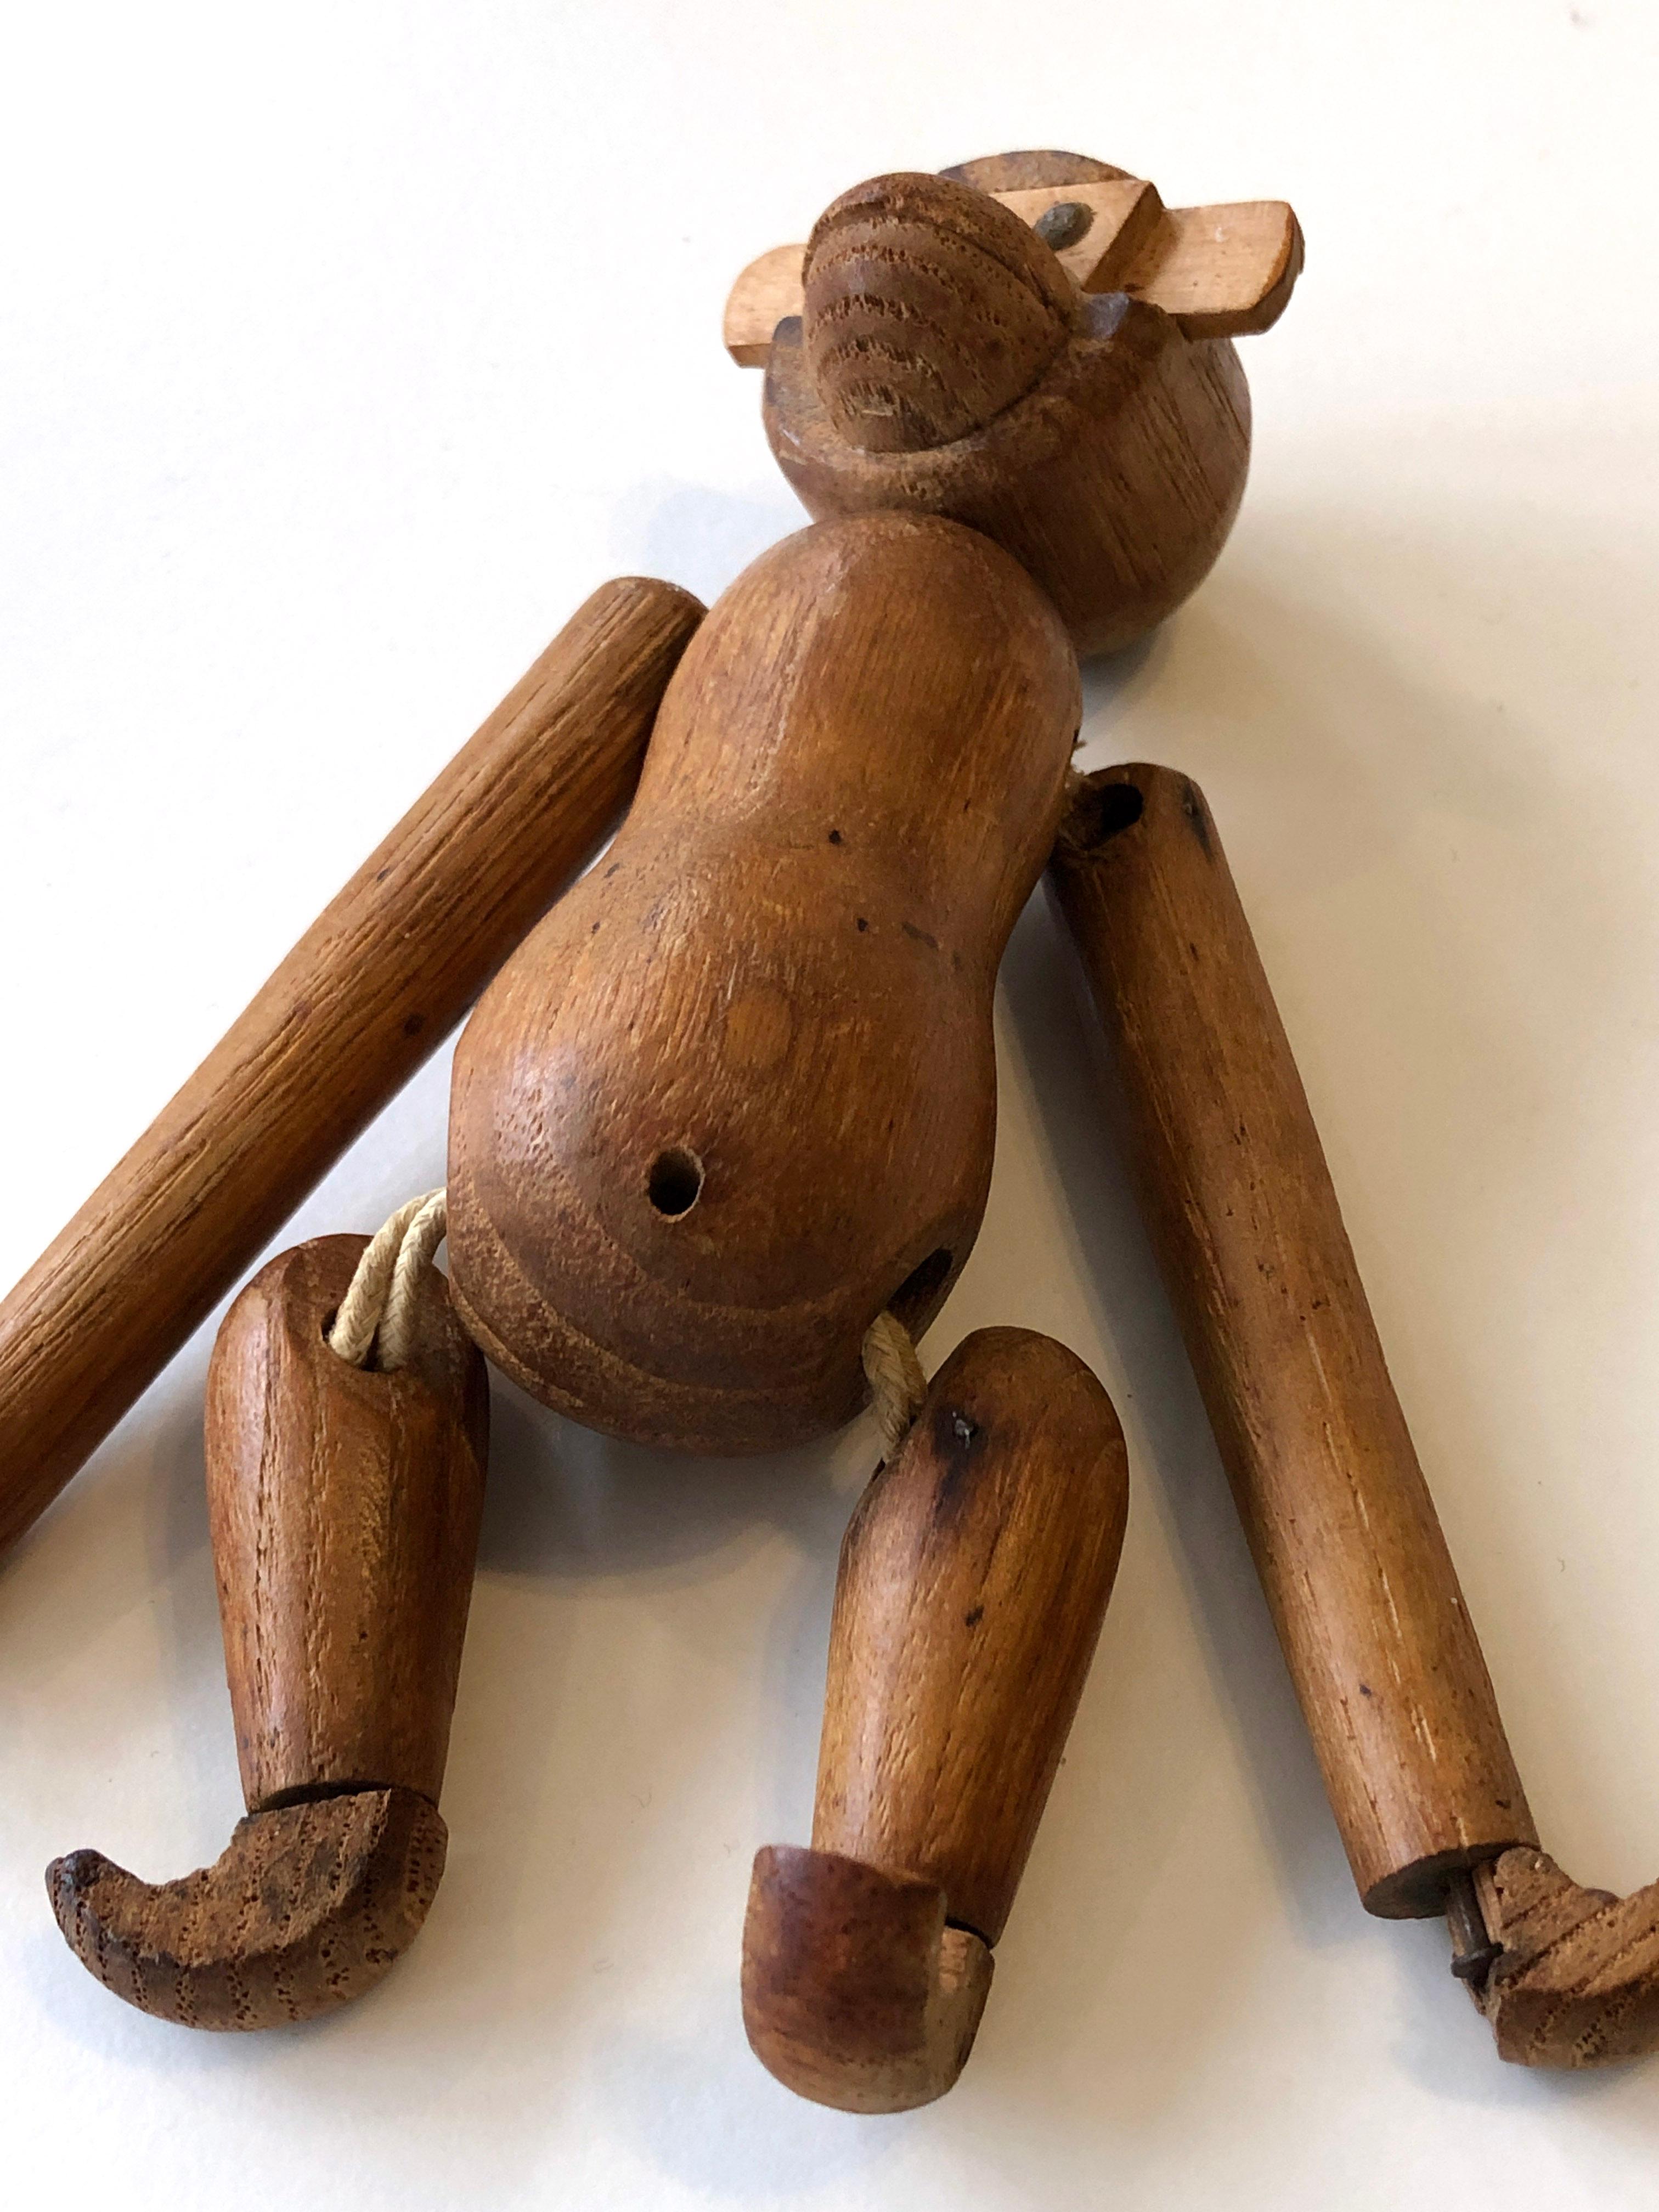 Vintage 1950's small wooden monkey - Kay Bojesen style For Sale 1